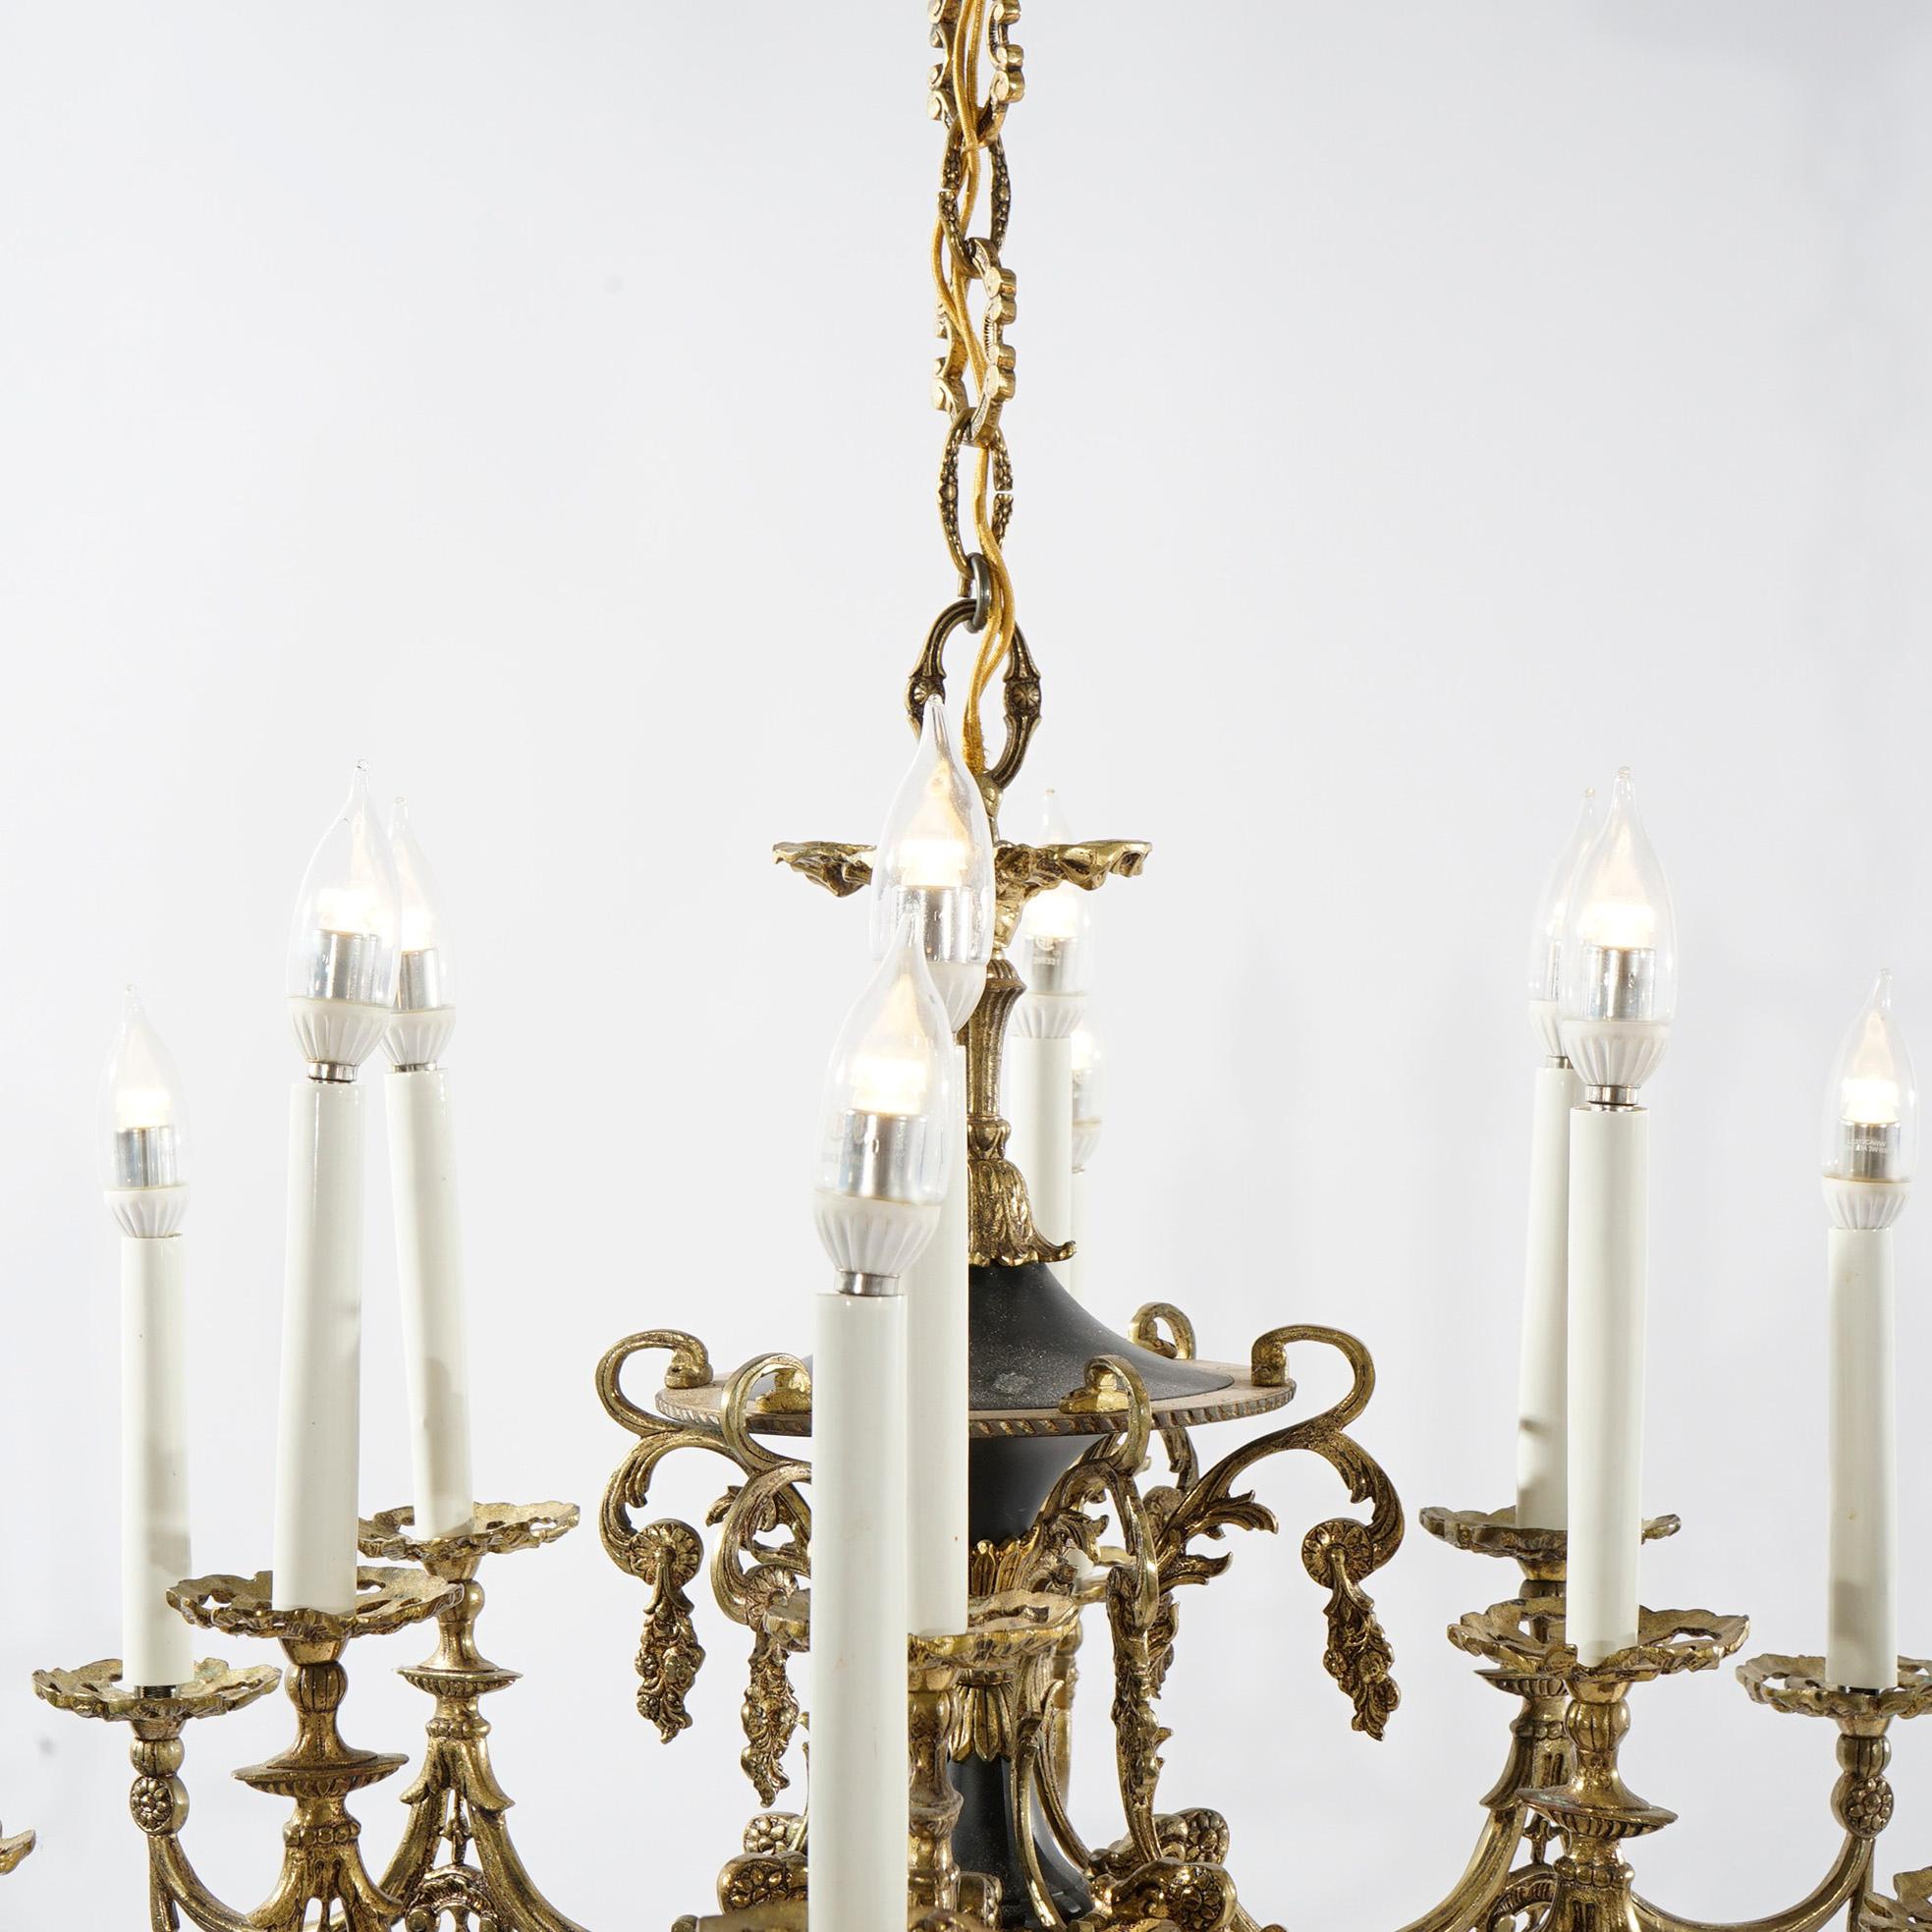 Antique French Empire Style Ebonized Bronze Twelve-Light Chandelier, Early 20thC For Sale 6